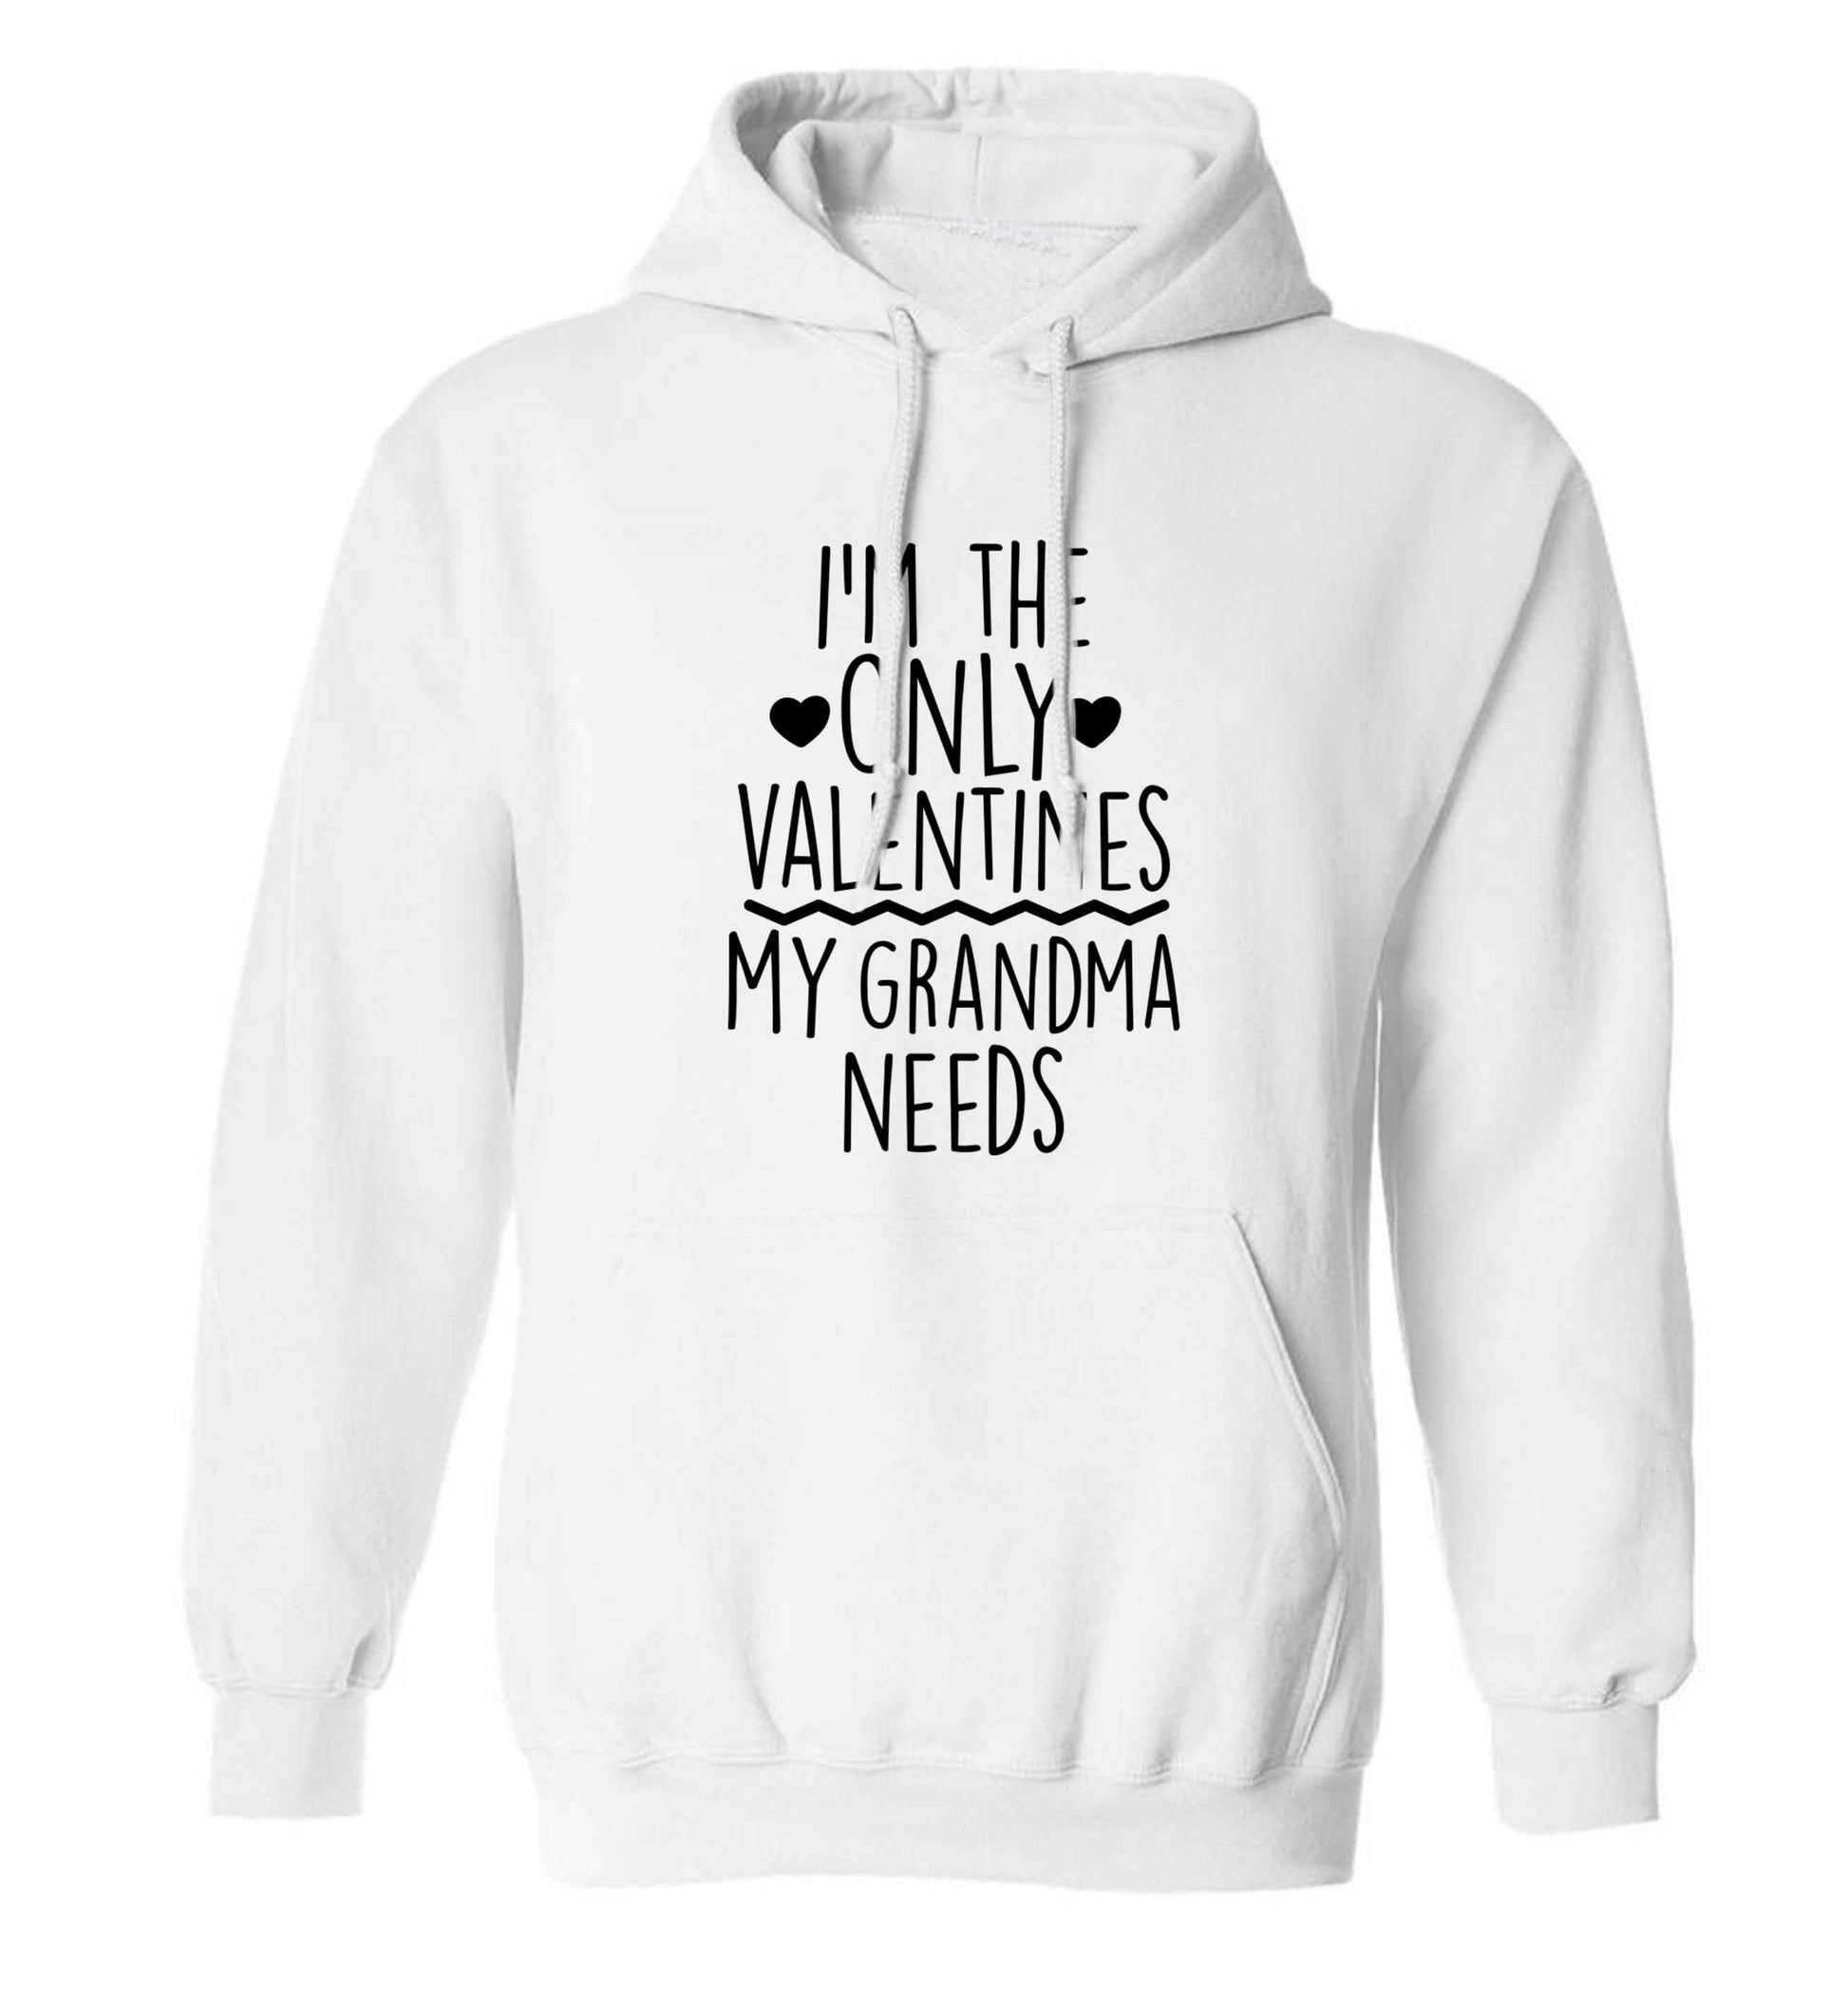 I'm the only valentines my grandma needs adults unisex white hoodie 2XL